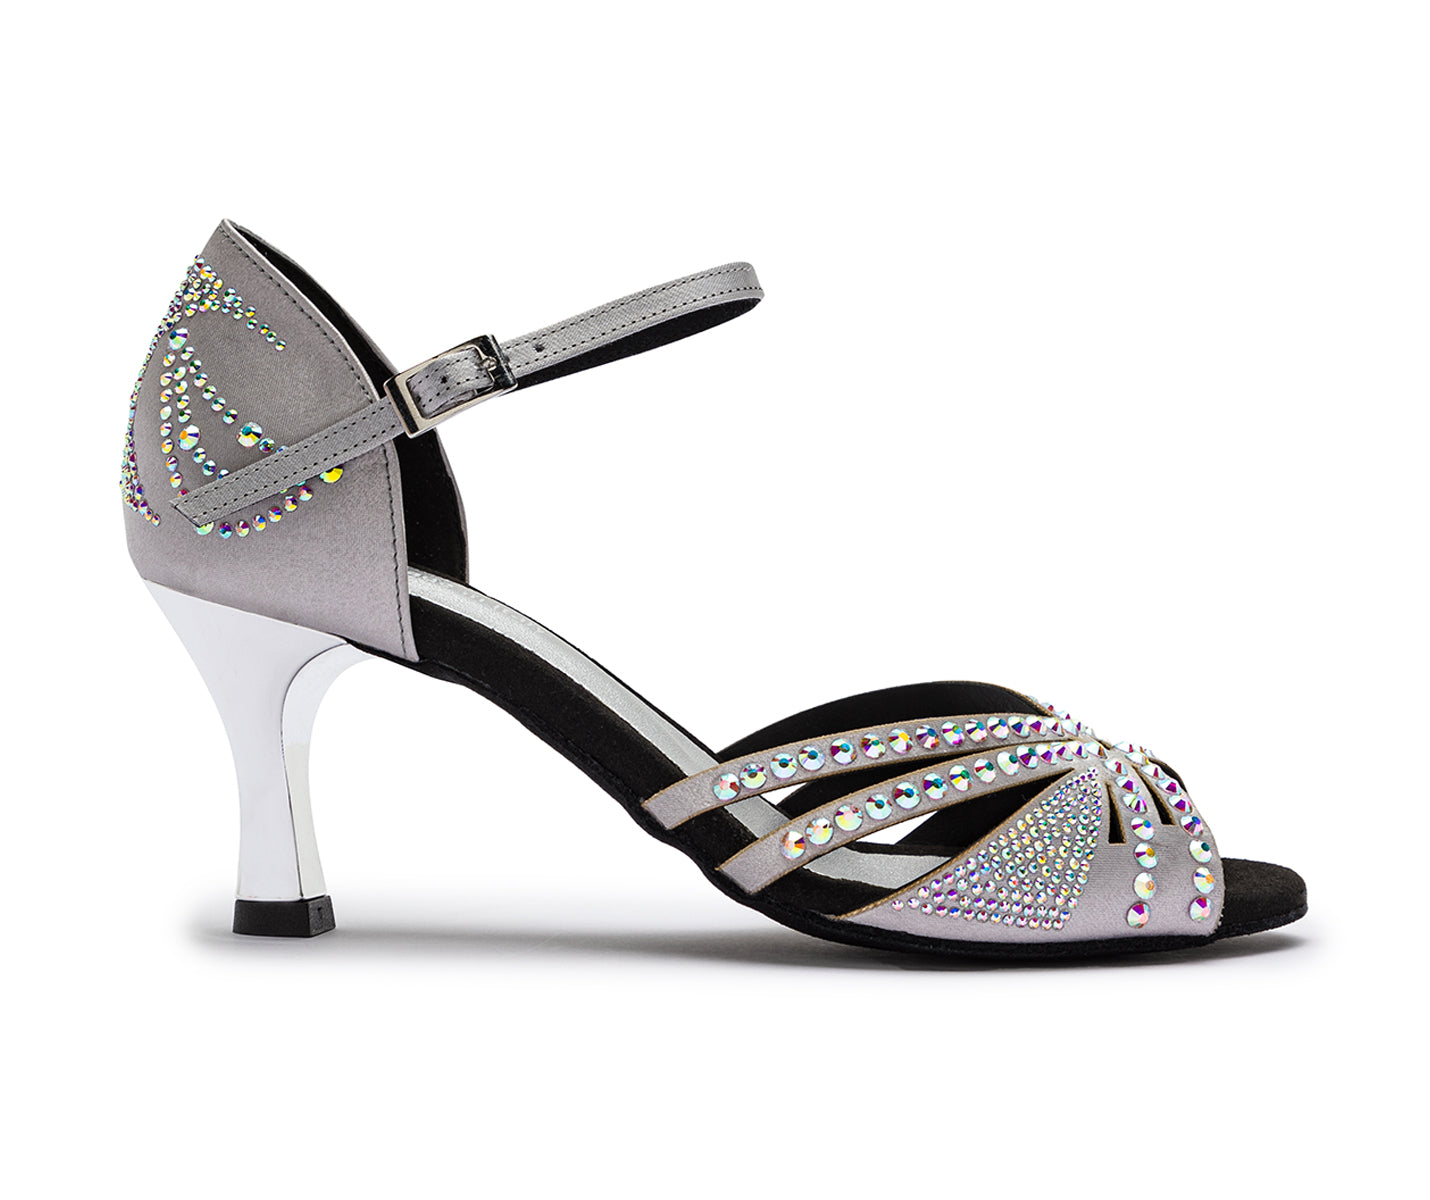 DQ L3m dance shoes in silver with rhinestones